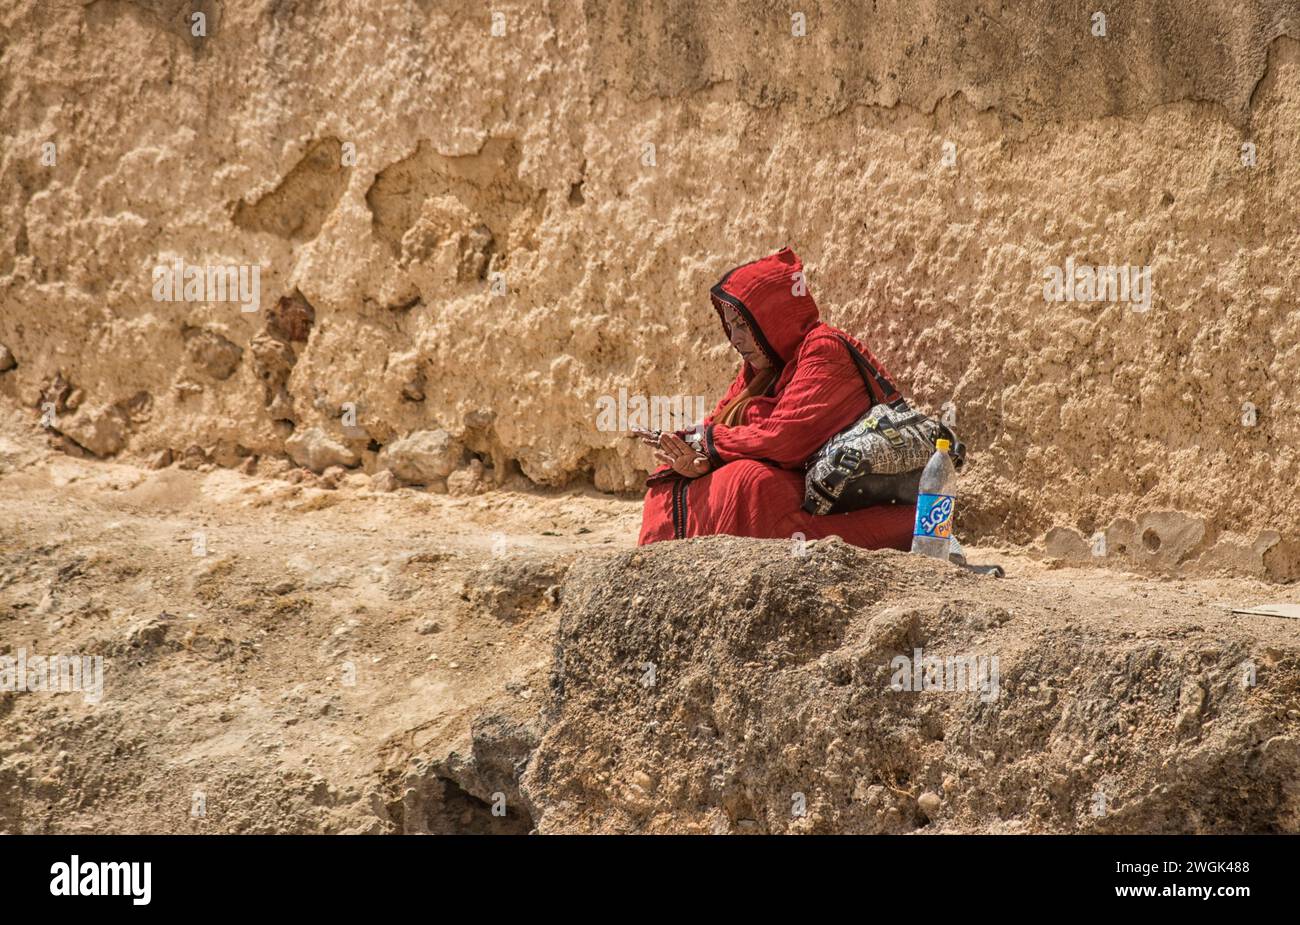 A woman seated in the outskirts of Tangier, a Moroccan port on the Strait of Gibraltar, has been a strategic gateway between Africa and Europe since Phoenician times. Its whitewashed hillside medina is home to the Dar el Makhzen, a palace of the sultans that's now a museum of Moroccan artifacts. The American Legation Museum, also in the medina, documents early diplomatic relations between the U.S. and Morocco in an 1821 Moorish-style former consulate. Morocco. Stock Photo